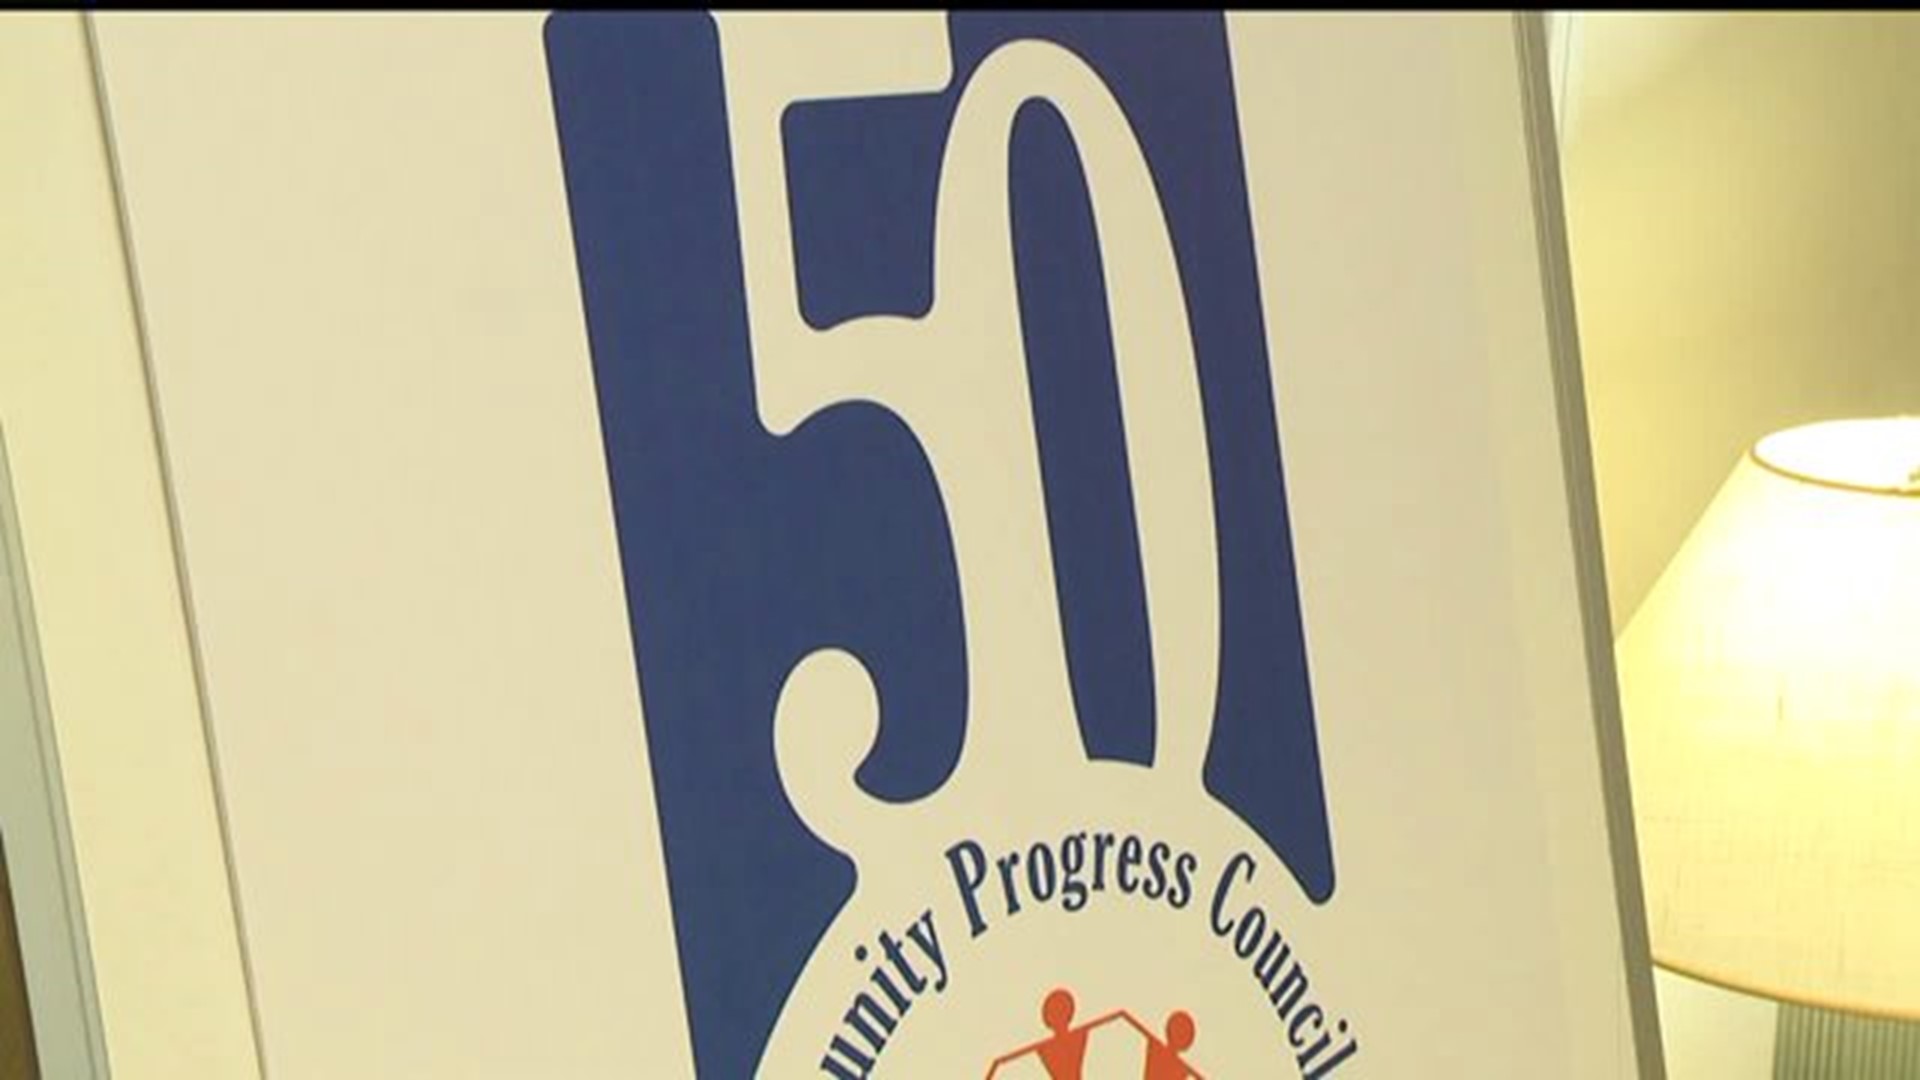 York County nonprofit takes out loan, but interest will not be reimbursed